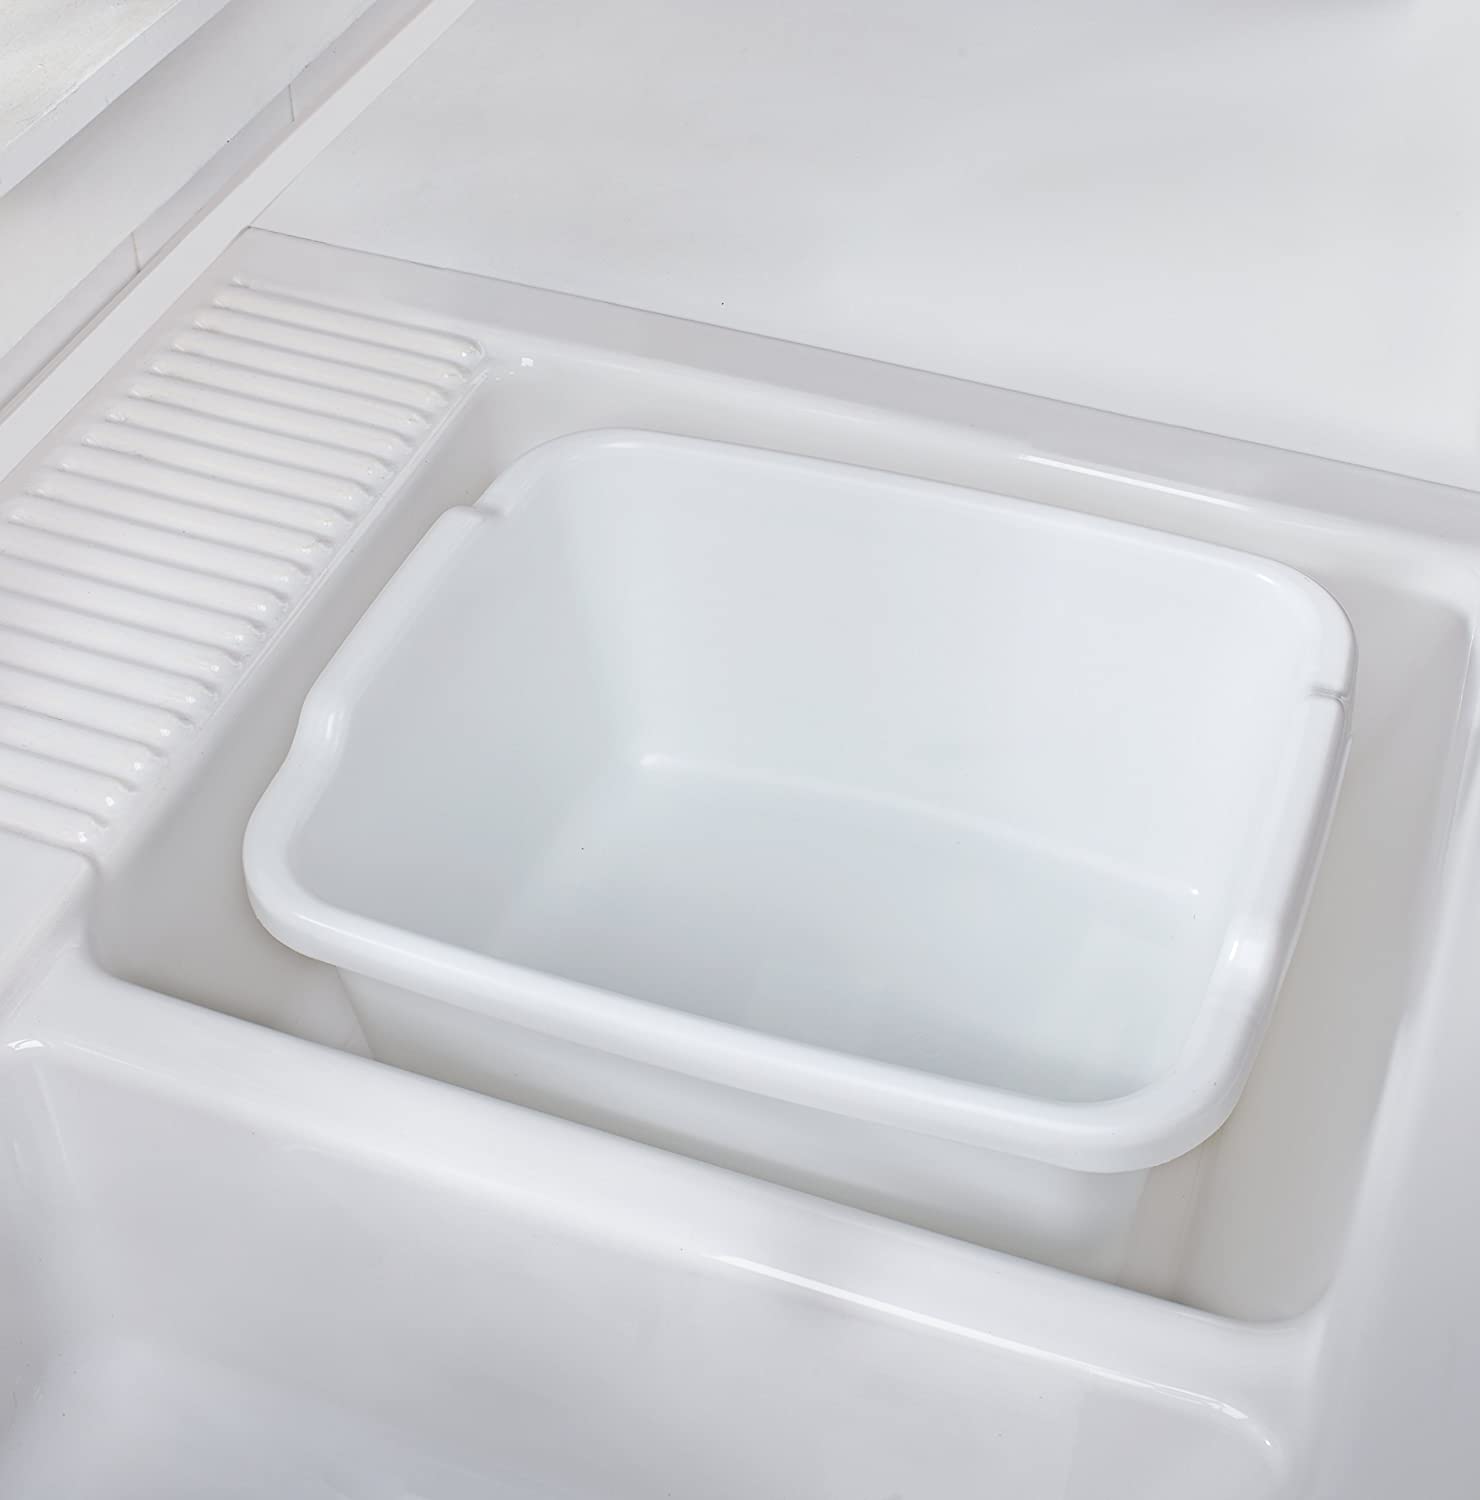 Rubbermaid Large Dishpan, White - Whole and All